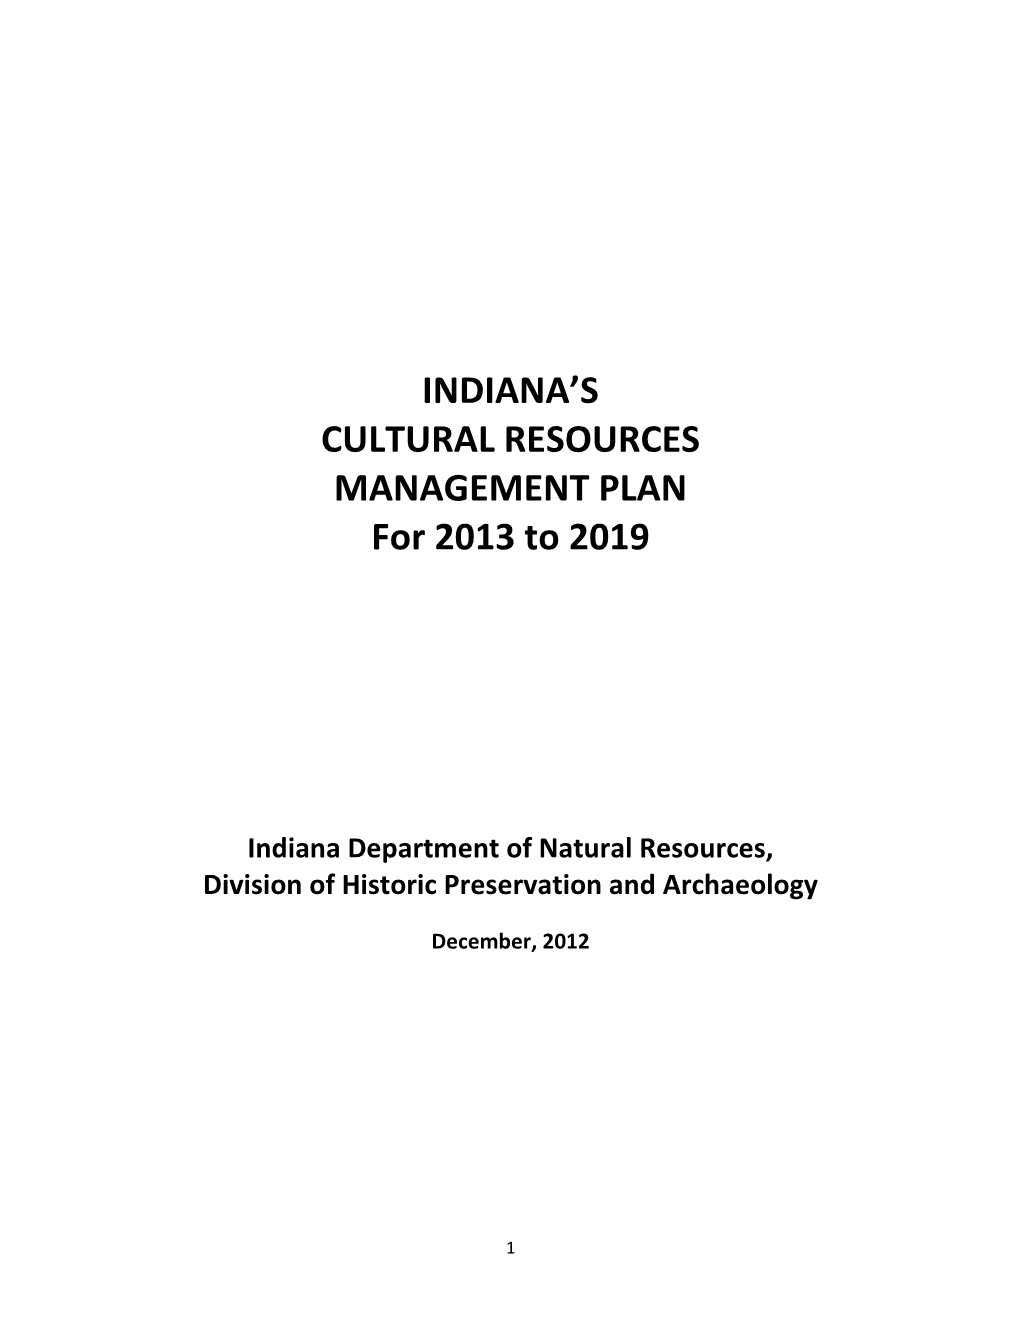 INDIANA's CULTURAL RESOURCES MANAGEMENT PLAN For